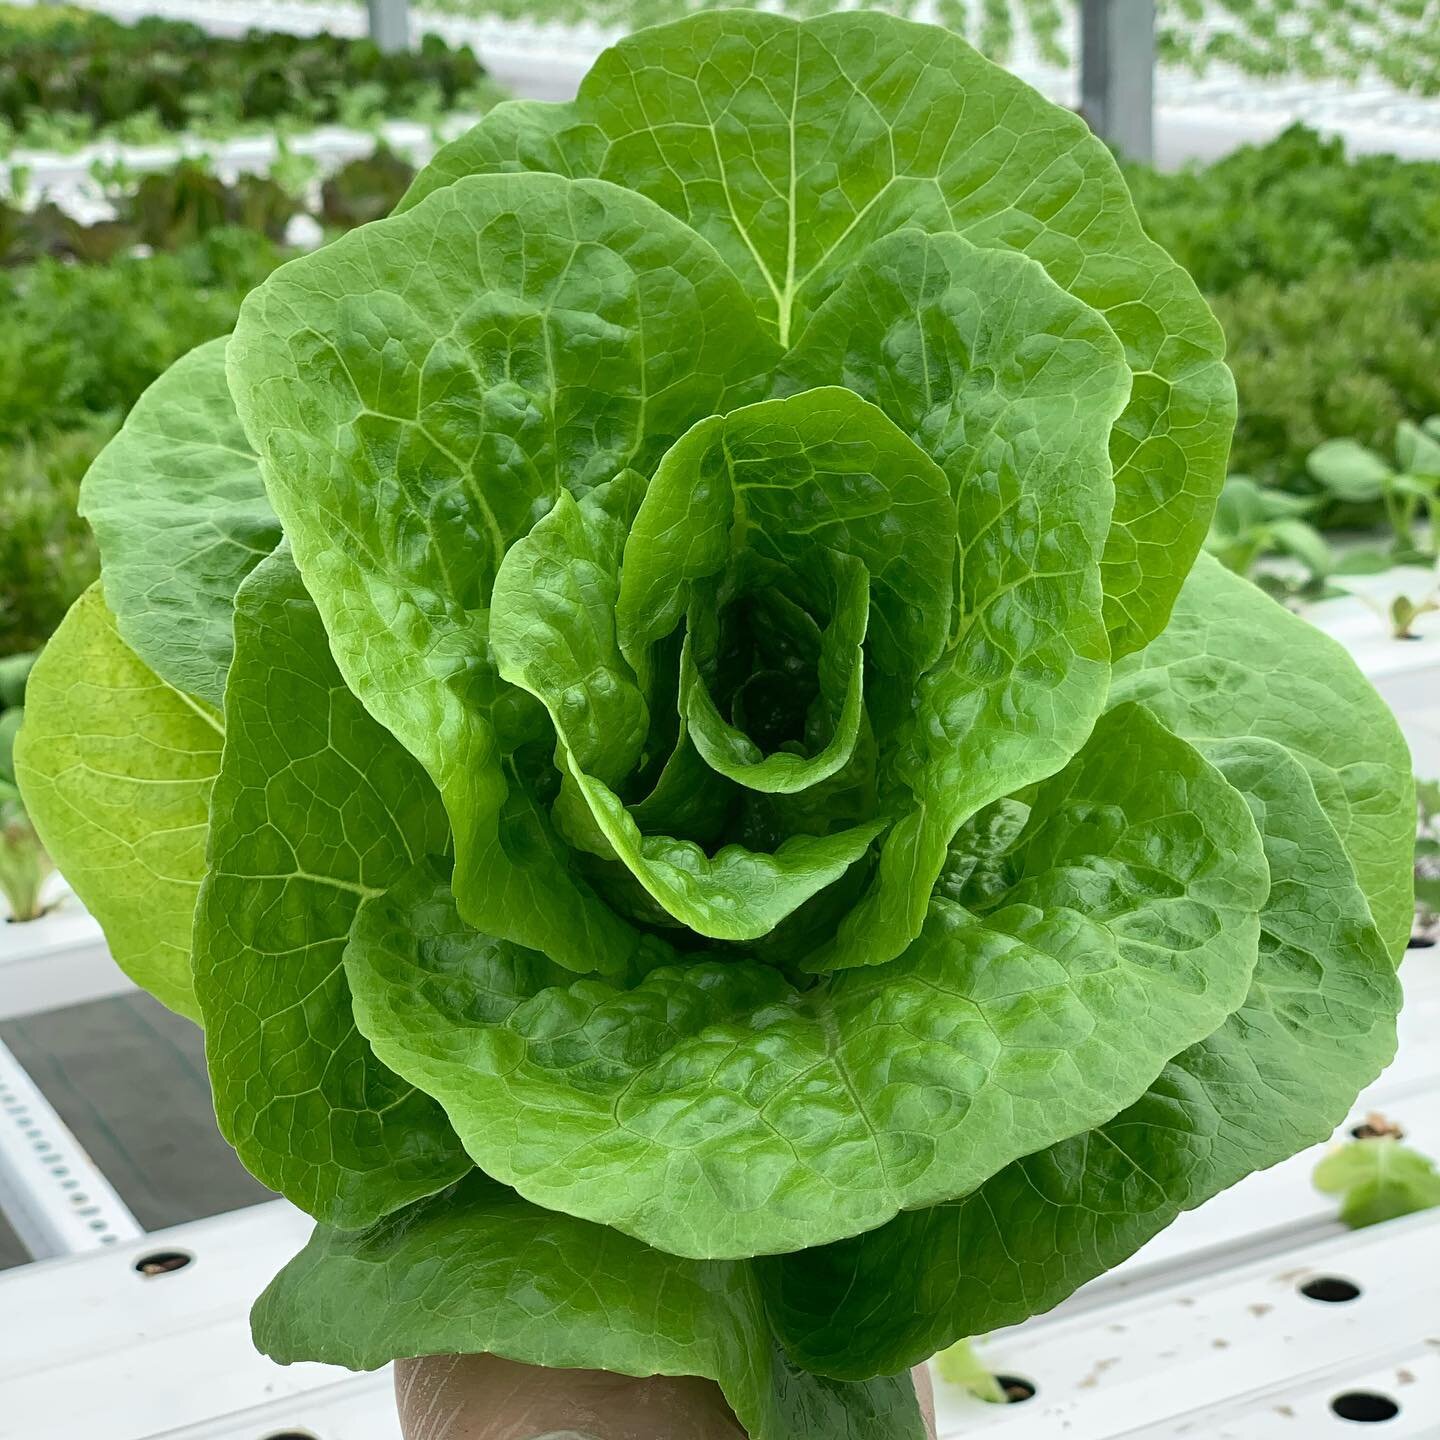 Most beautiful lettuce that you ever did see.....
.
.
.
#hydroponicfarming
#hydroponiclettuce
#sustainablefarming
#hydroponicgreenhouse